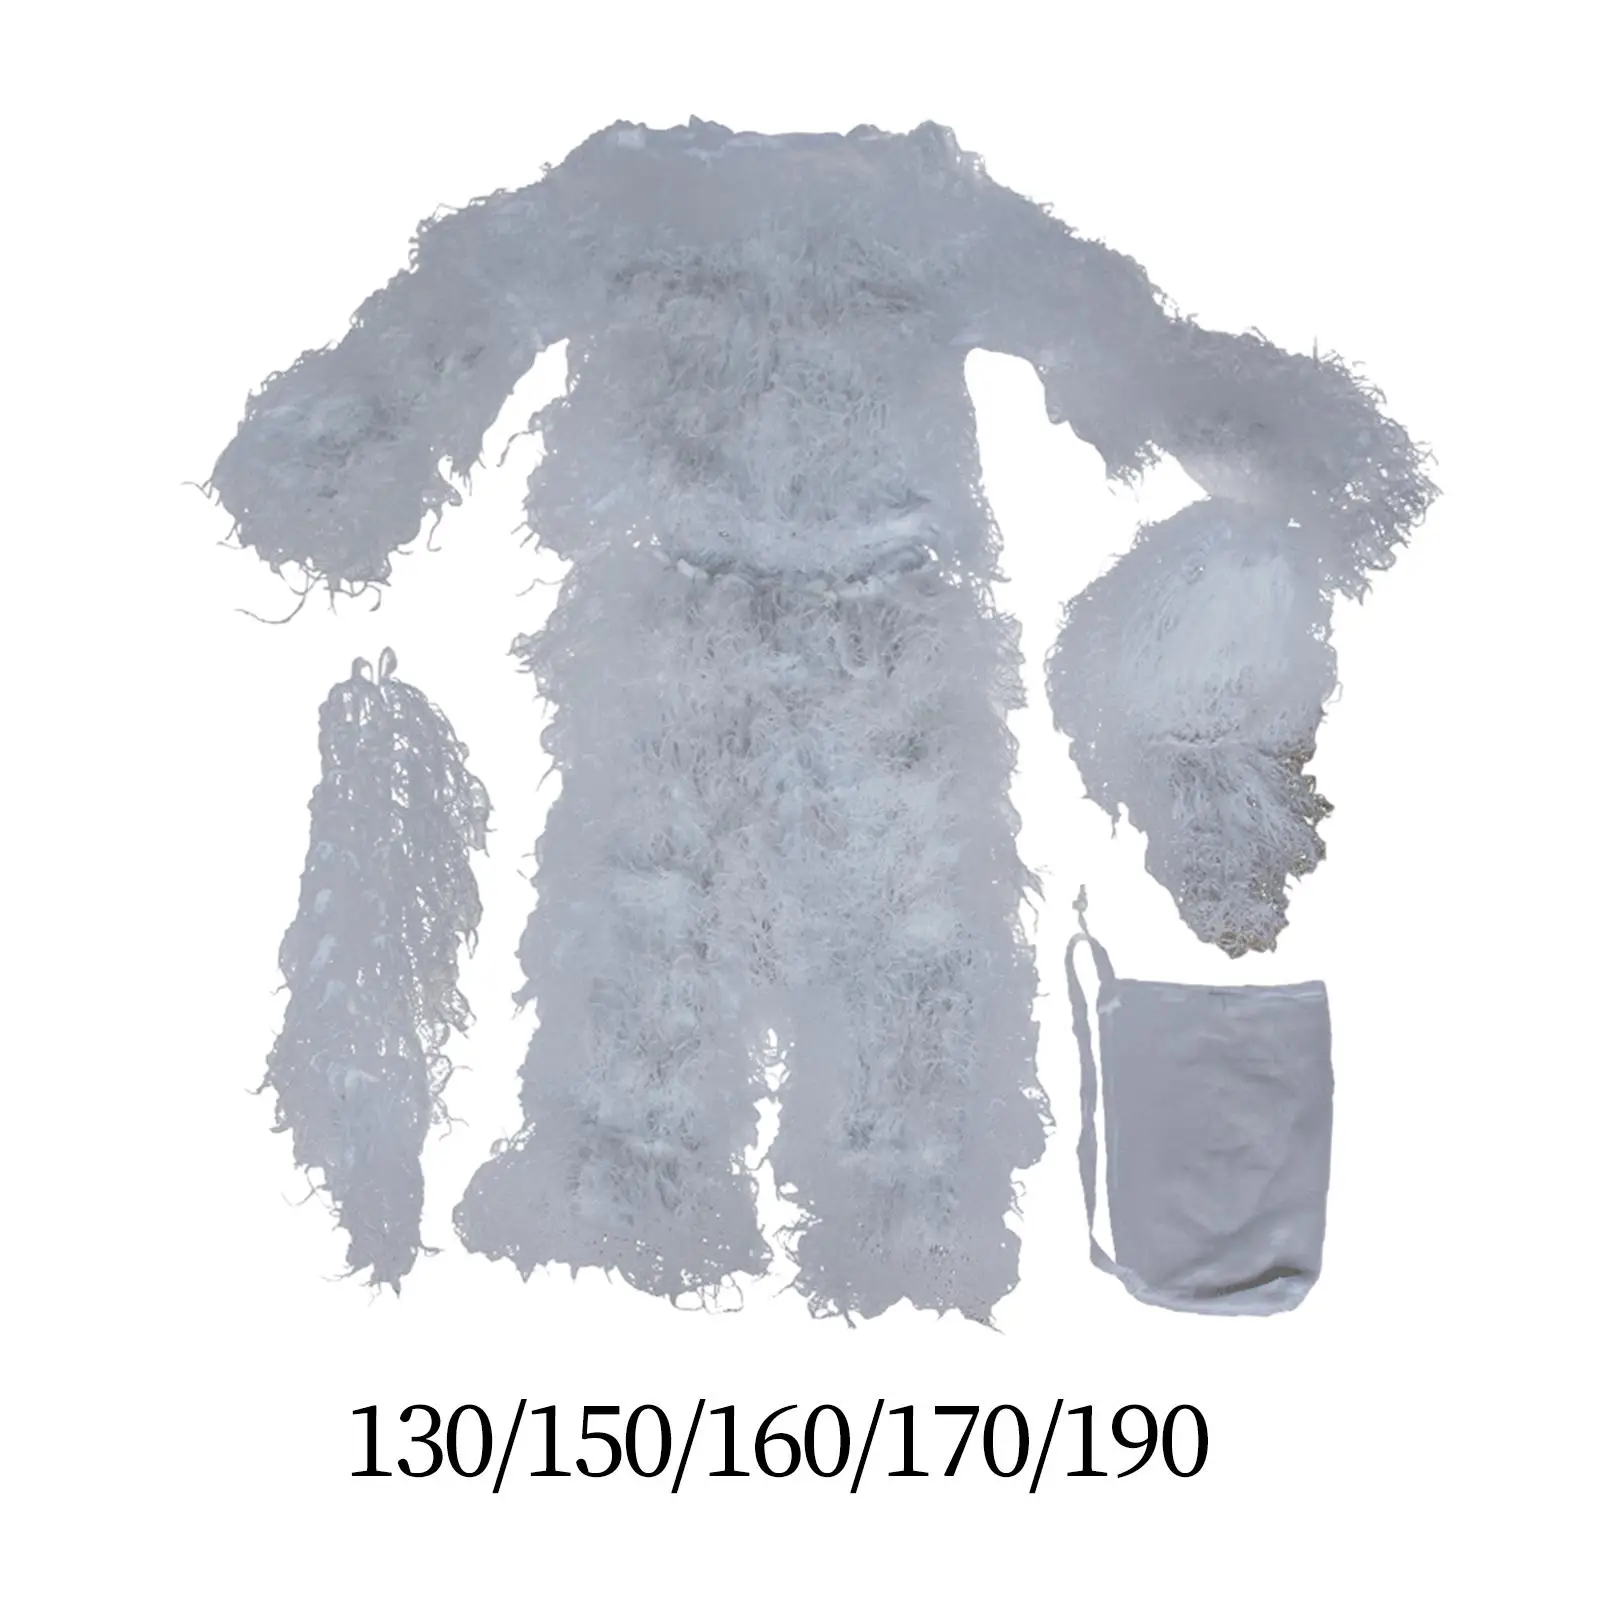 Ghillie Suit Breathable Gilly Suit White Suit Hunting suits for Photography Bird Watching Hunting Outdoor Game in Winter